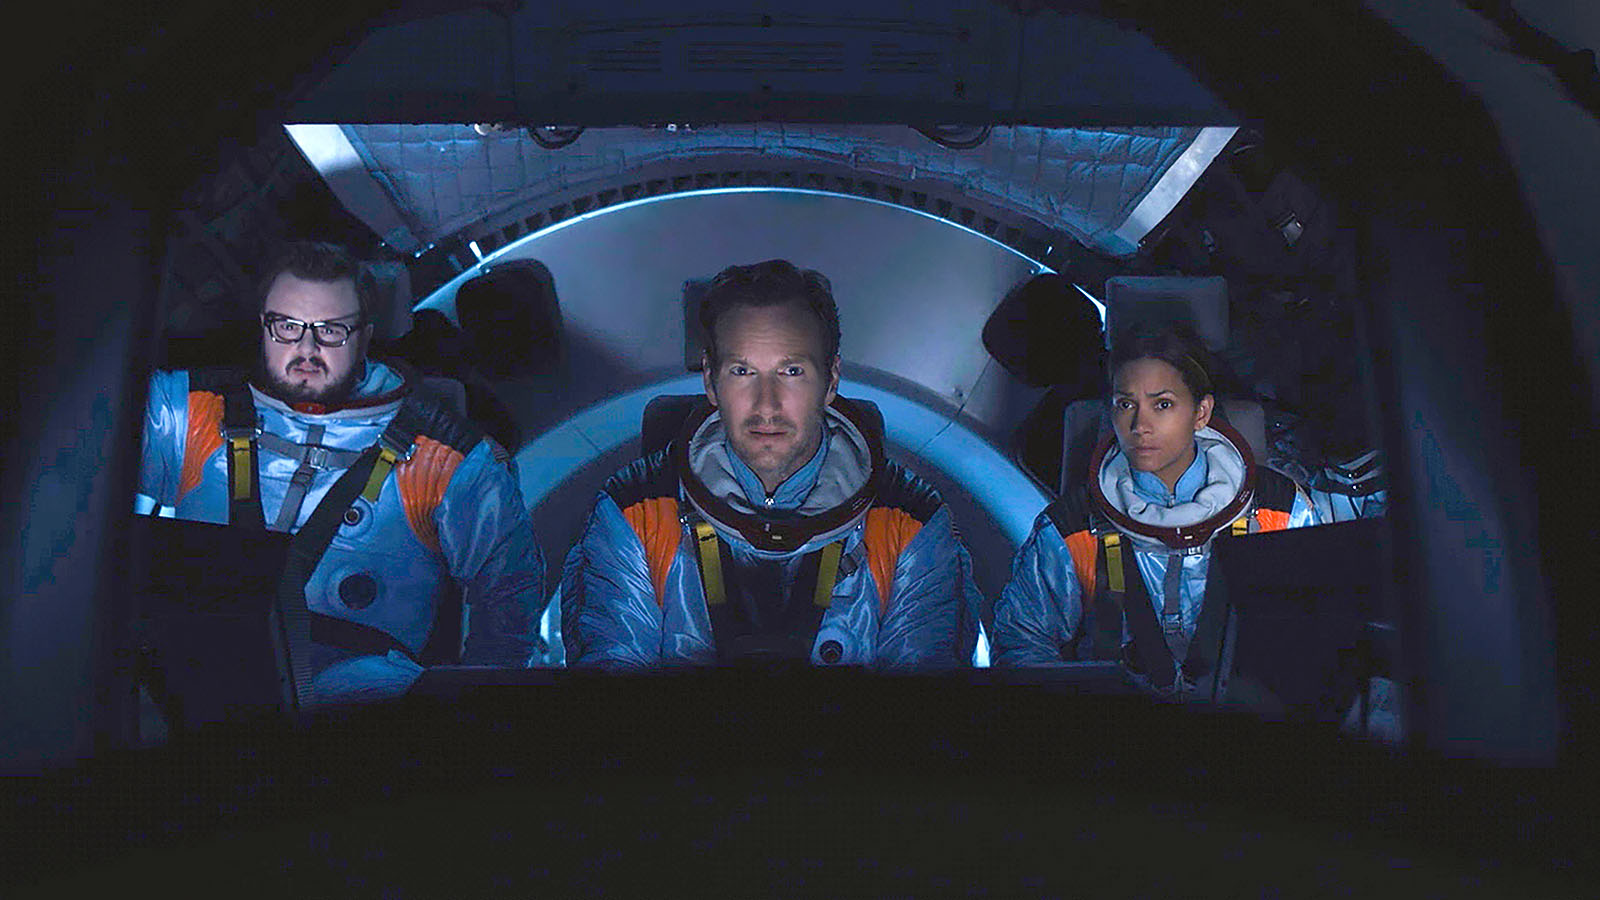 Houseman, Harper, and Fowler in the lander's cockpit. Image © Lionsgate Movies